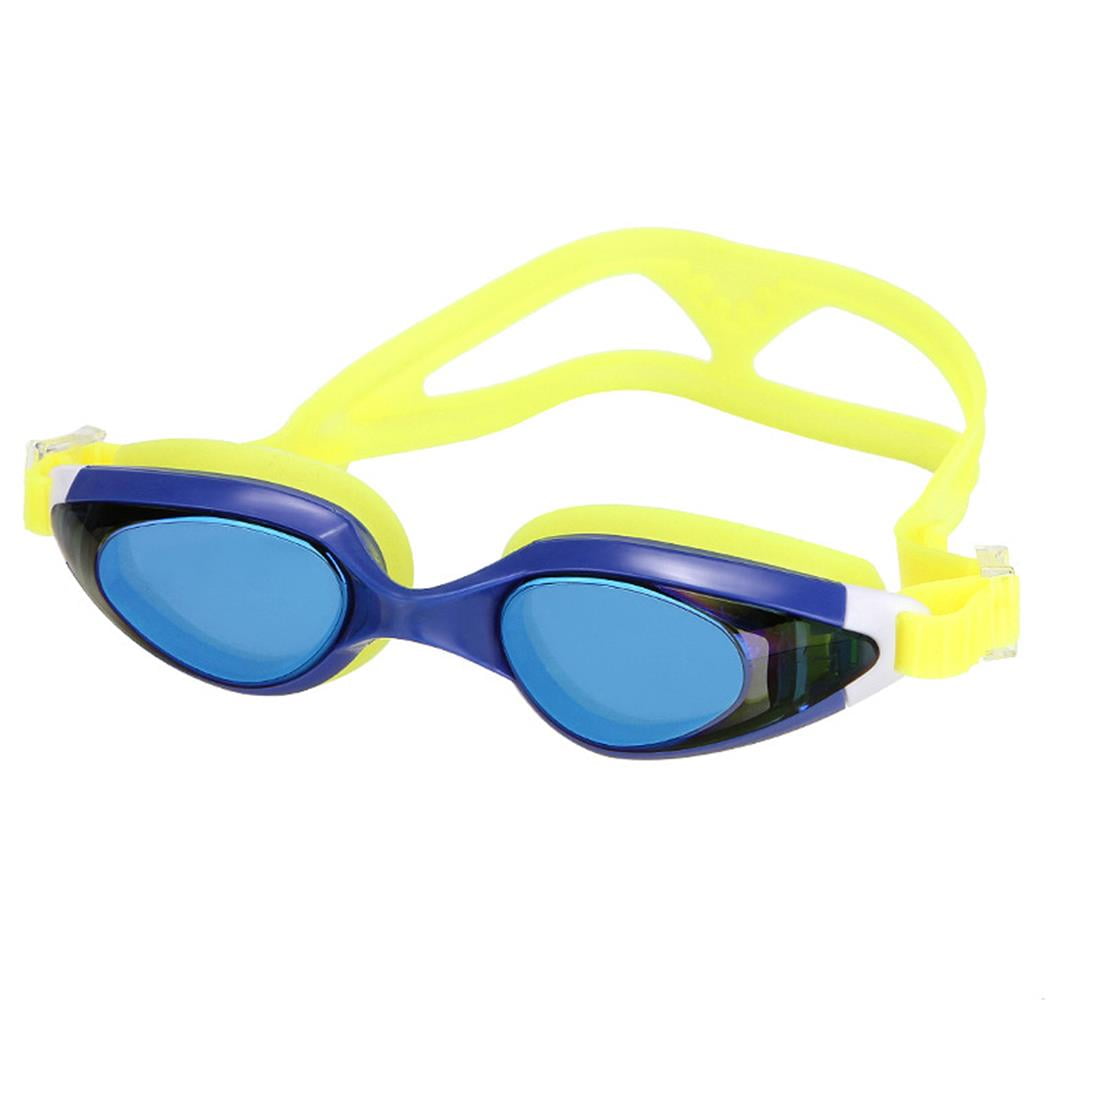 Buy Swimming Goggles (Black, Yellow Blue) By Speedo From